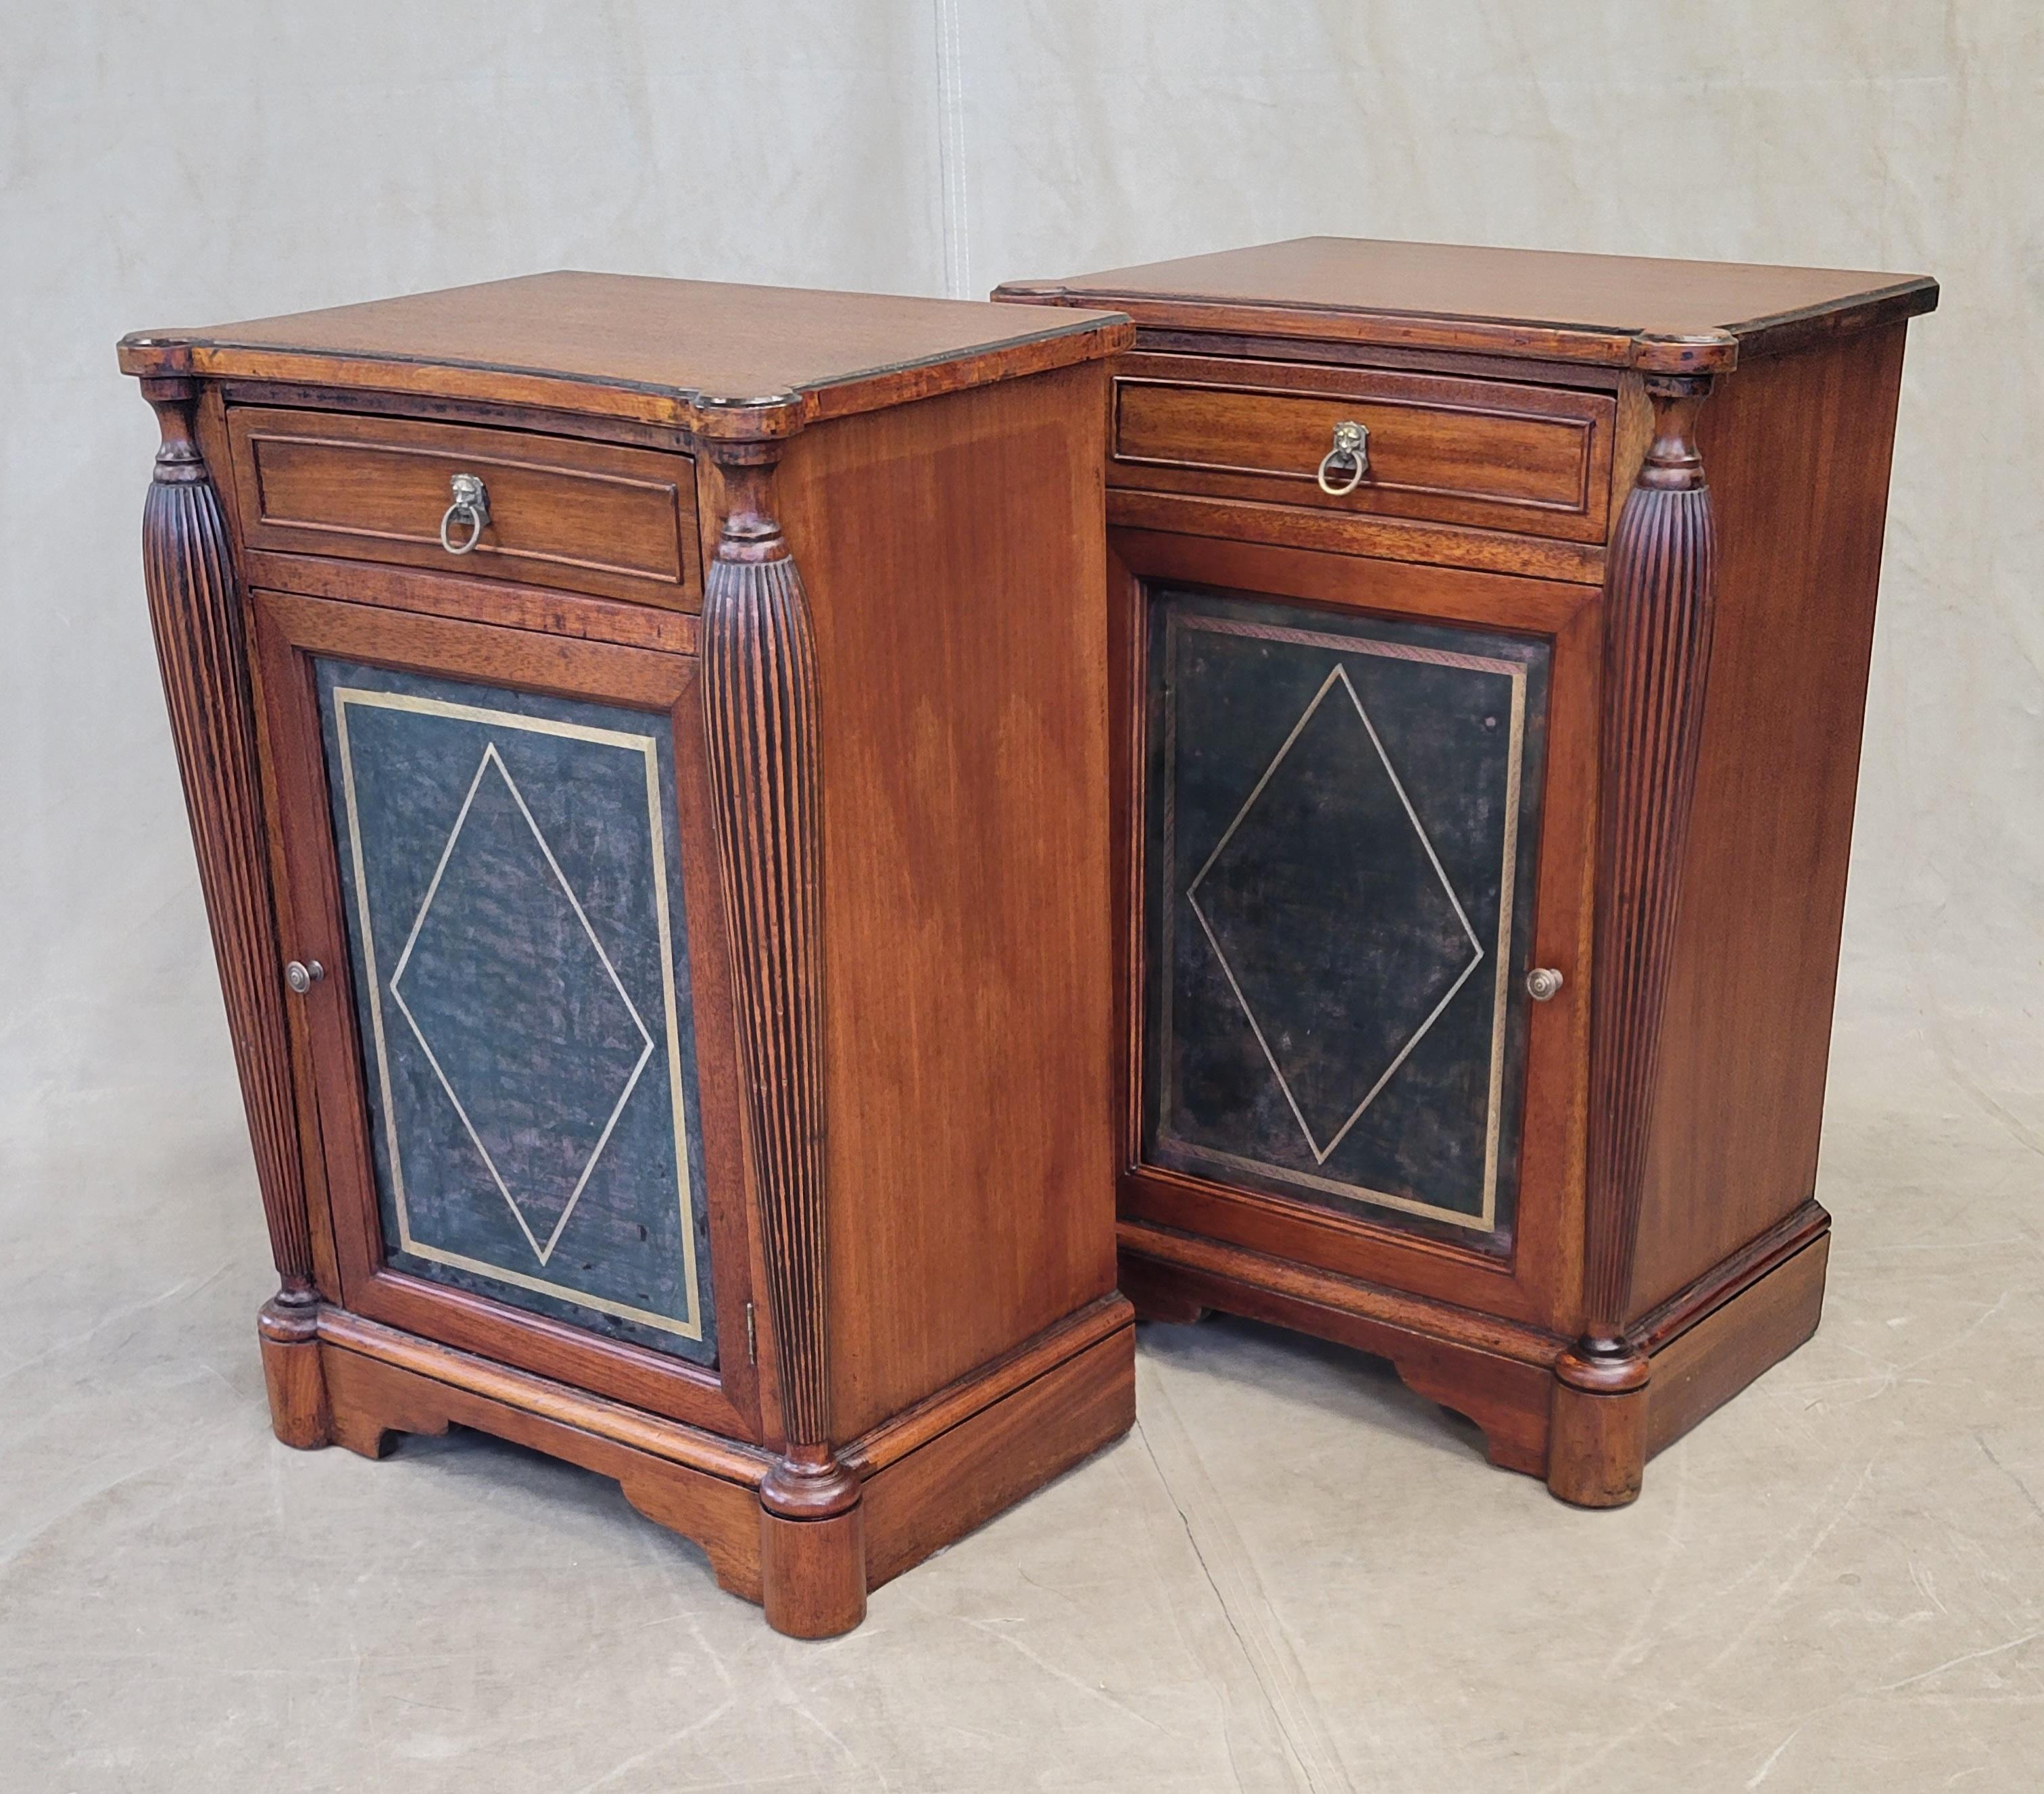 A gorgeous classic pair of vintage English mahogany nightstands with inset distressed green leather panels accented with gold embossing. Single drawer and cabinet portion with removable shelf offers a nice amount of storage. Original brass